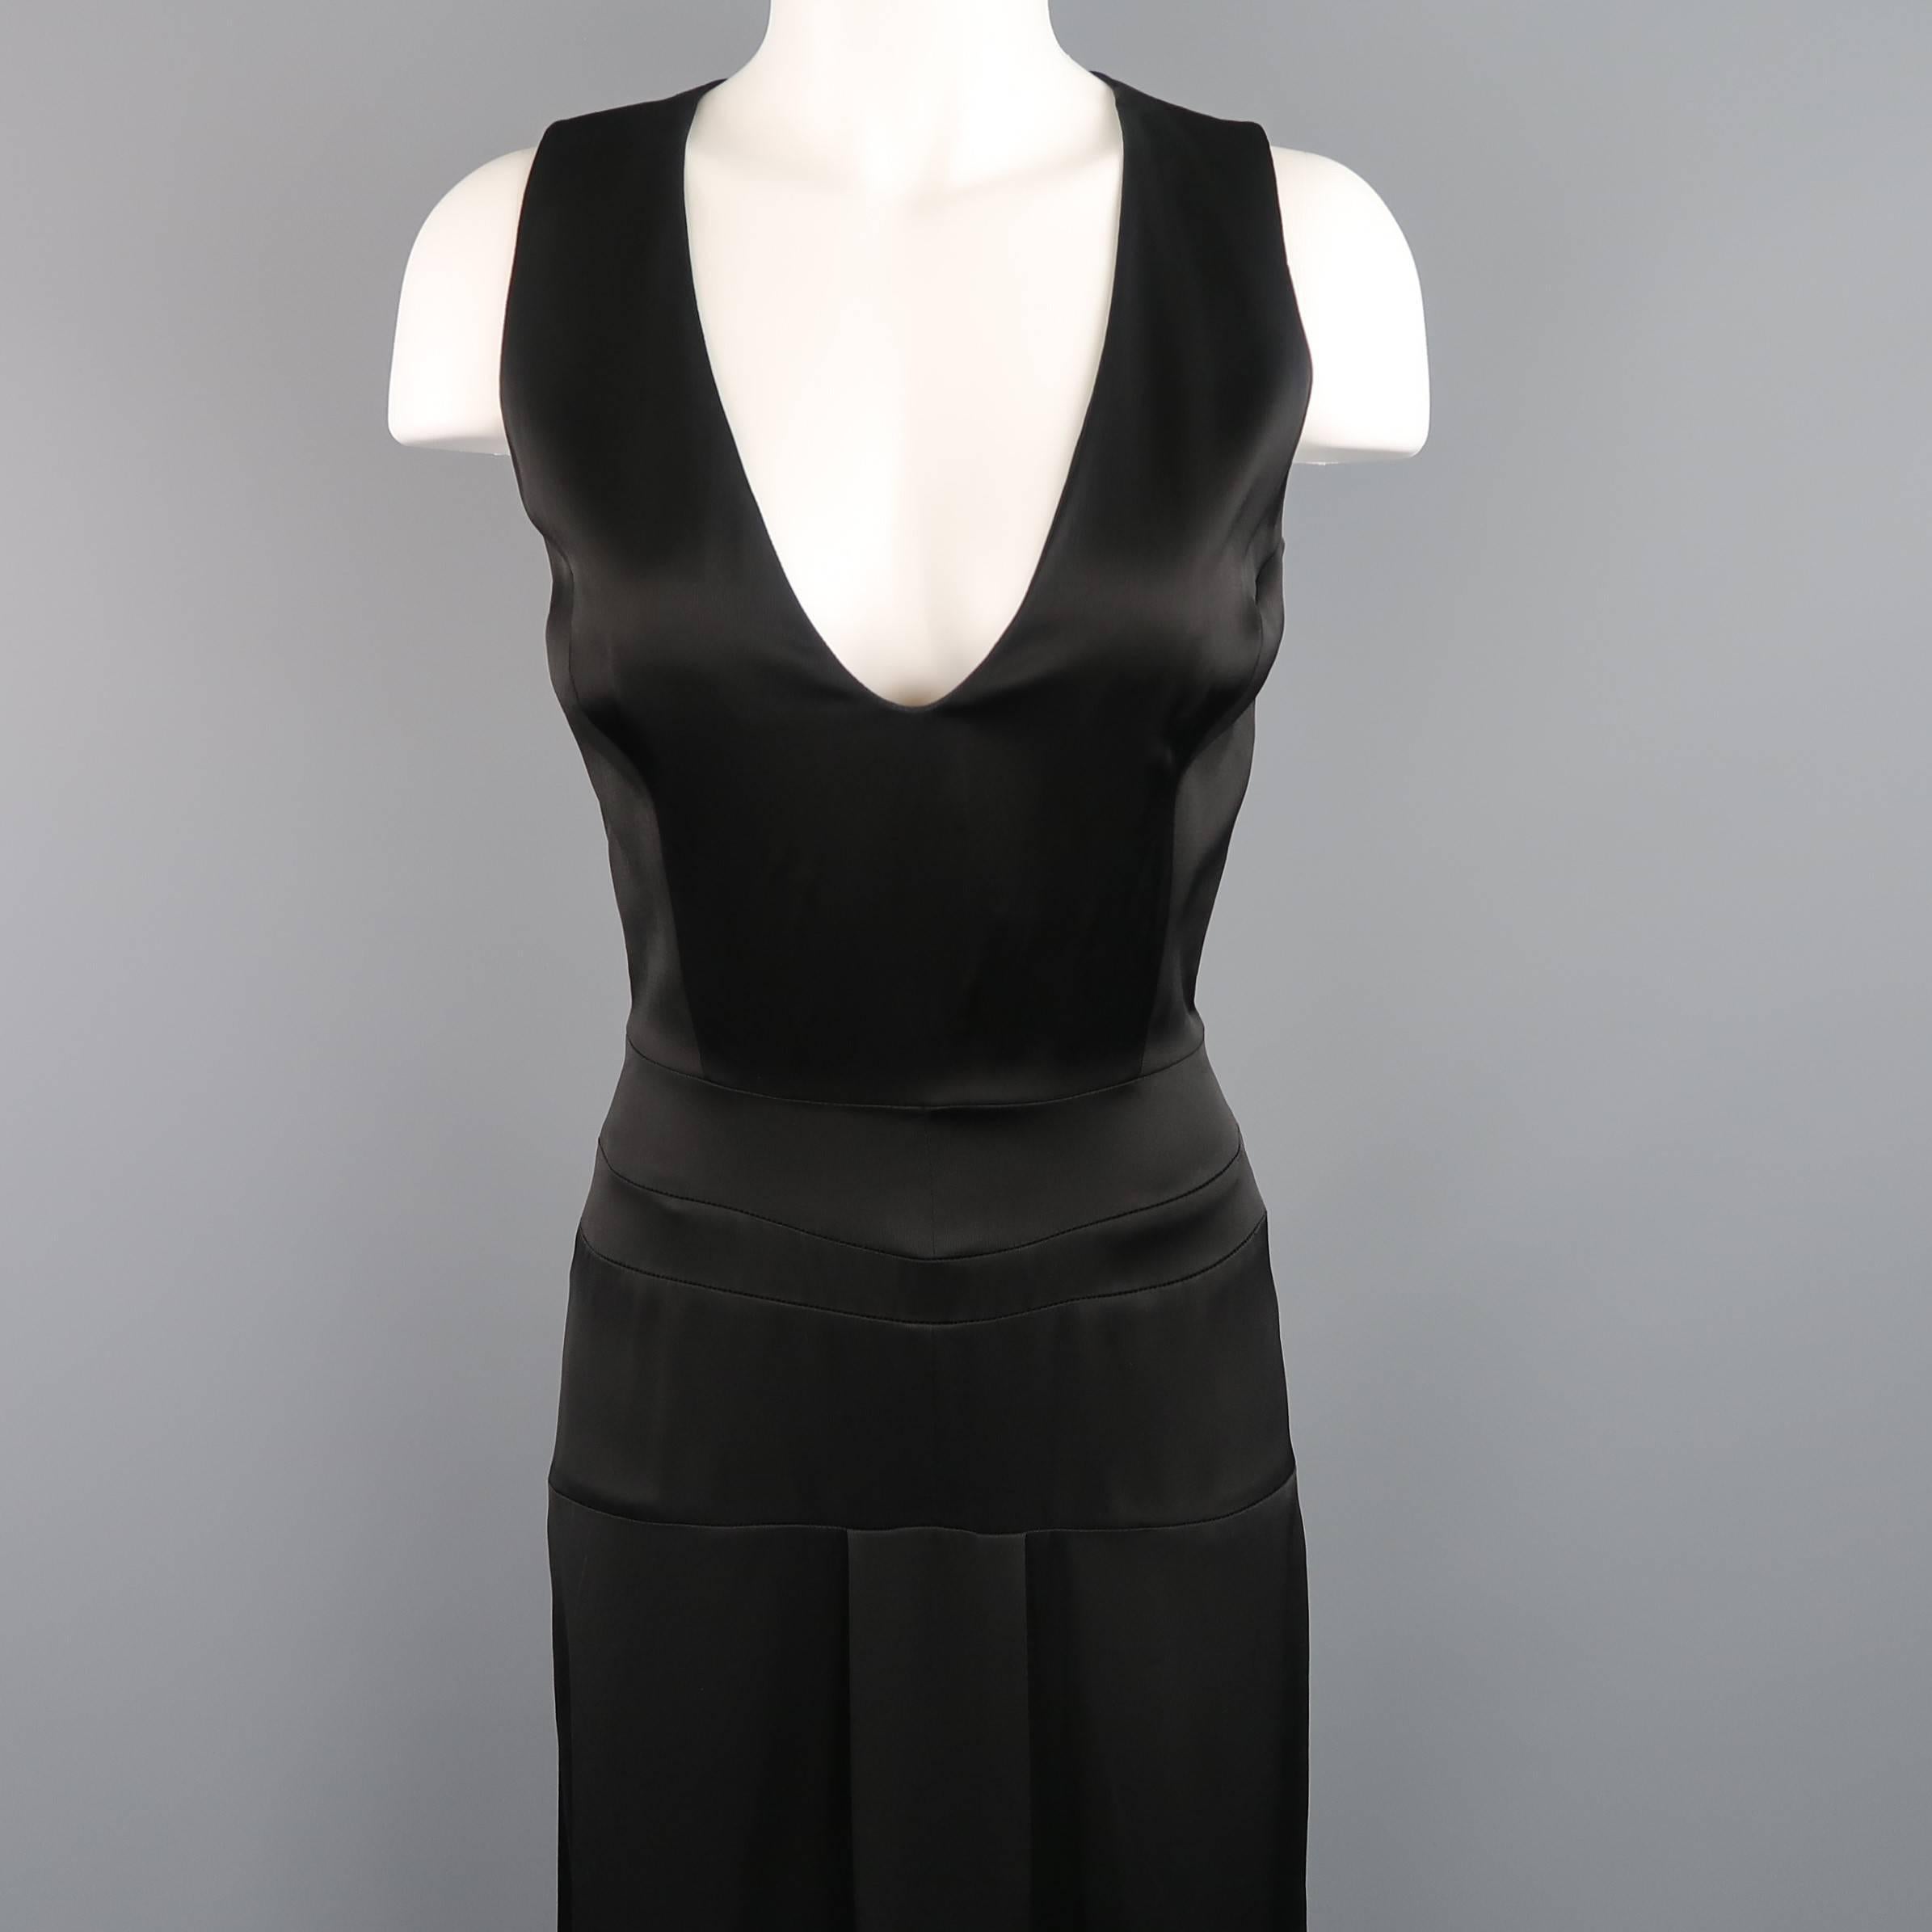 VICTORIA BECKHAM sleeveless maxi dress comes in a semi shine twill and features a V neckline, cinched, corset seam waistband, shift skirt with box pleat and tied sash belt. Made in UK.
 
Retails: $6,400.00

Excellent Pre-Owned Condition. 
Marked: US